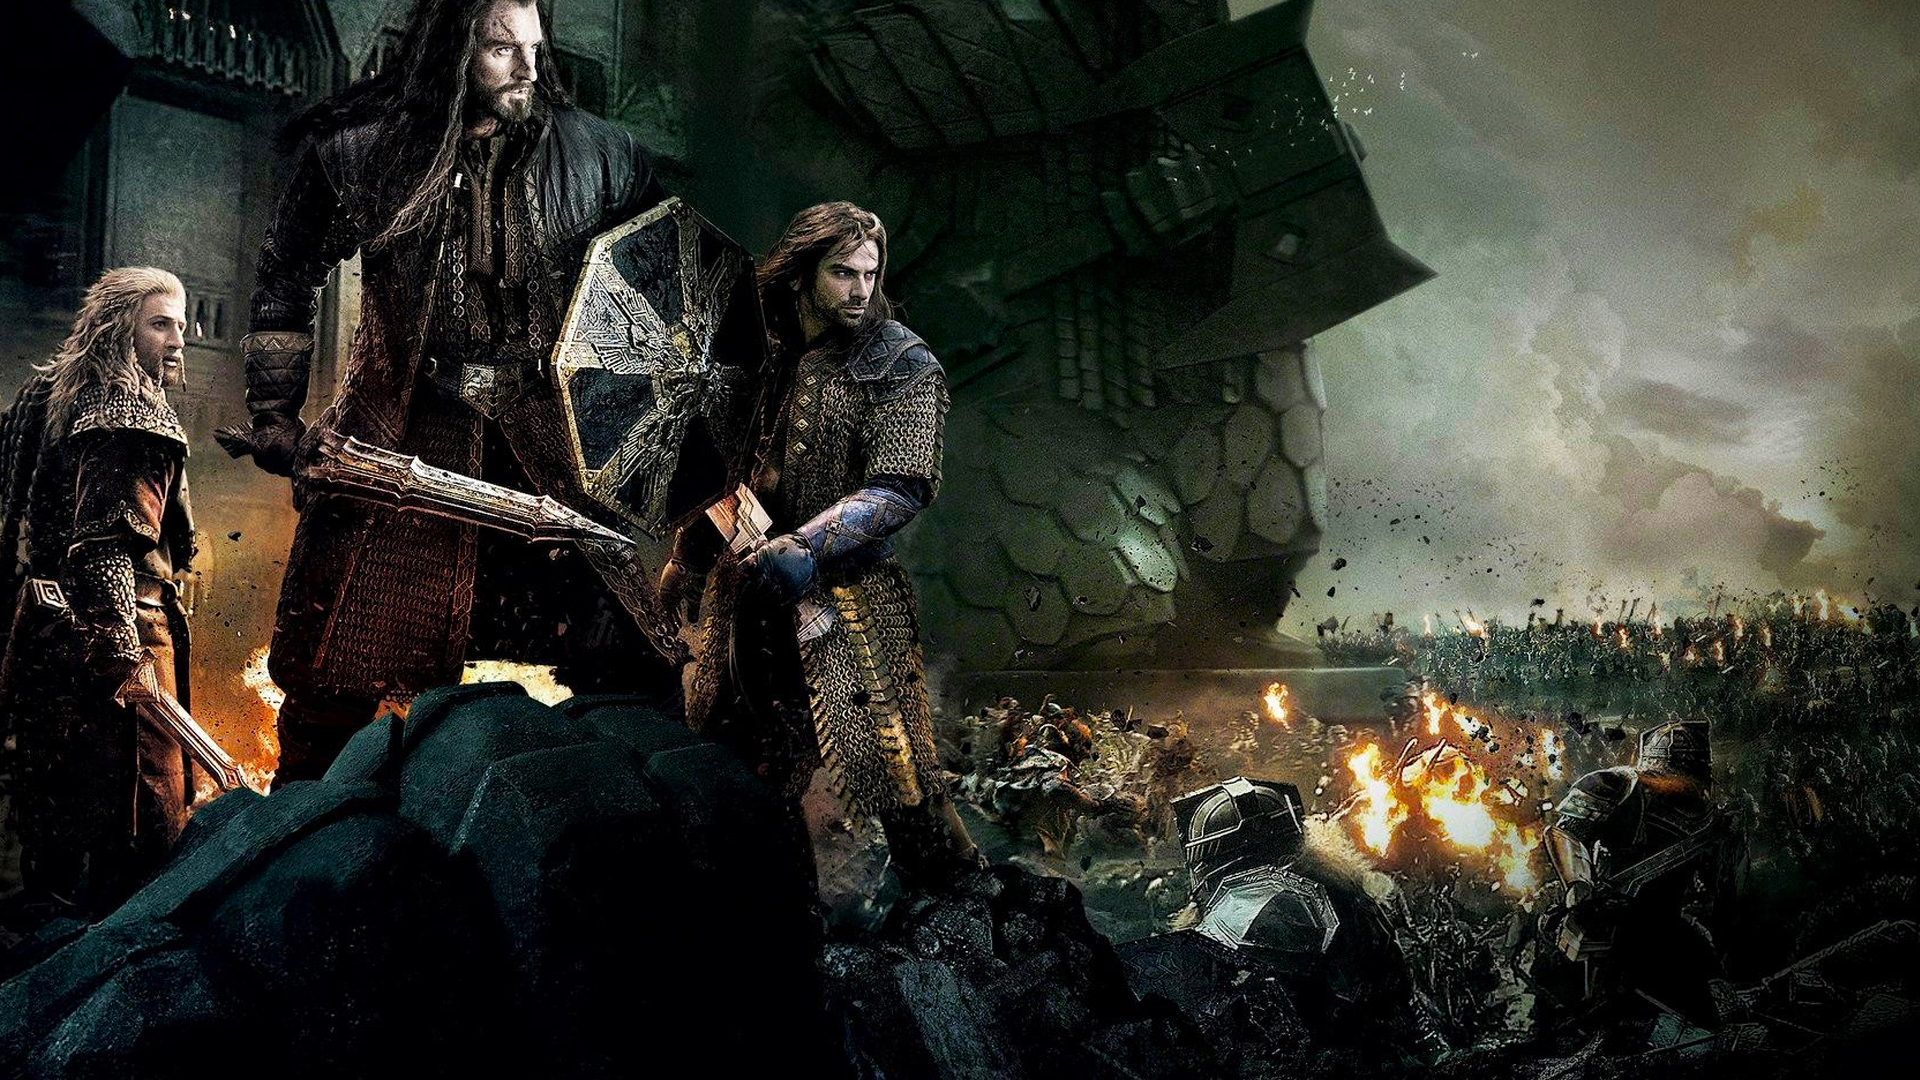 The Hobbit Battle of the Five Armies Wallpaper by sachso74 on 1920x1080